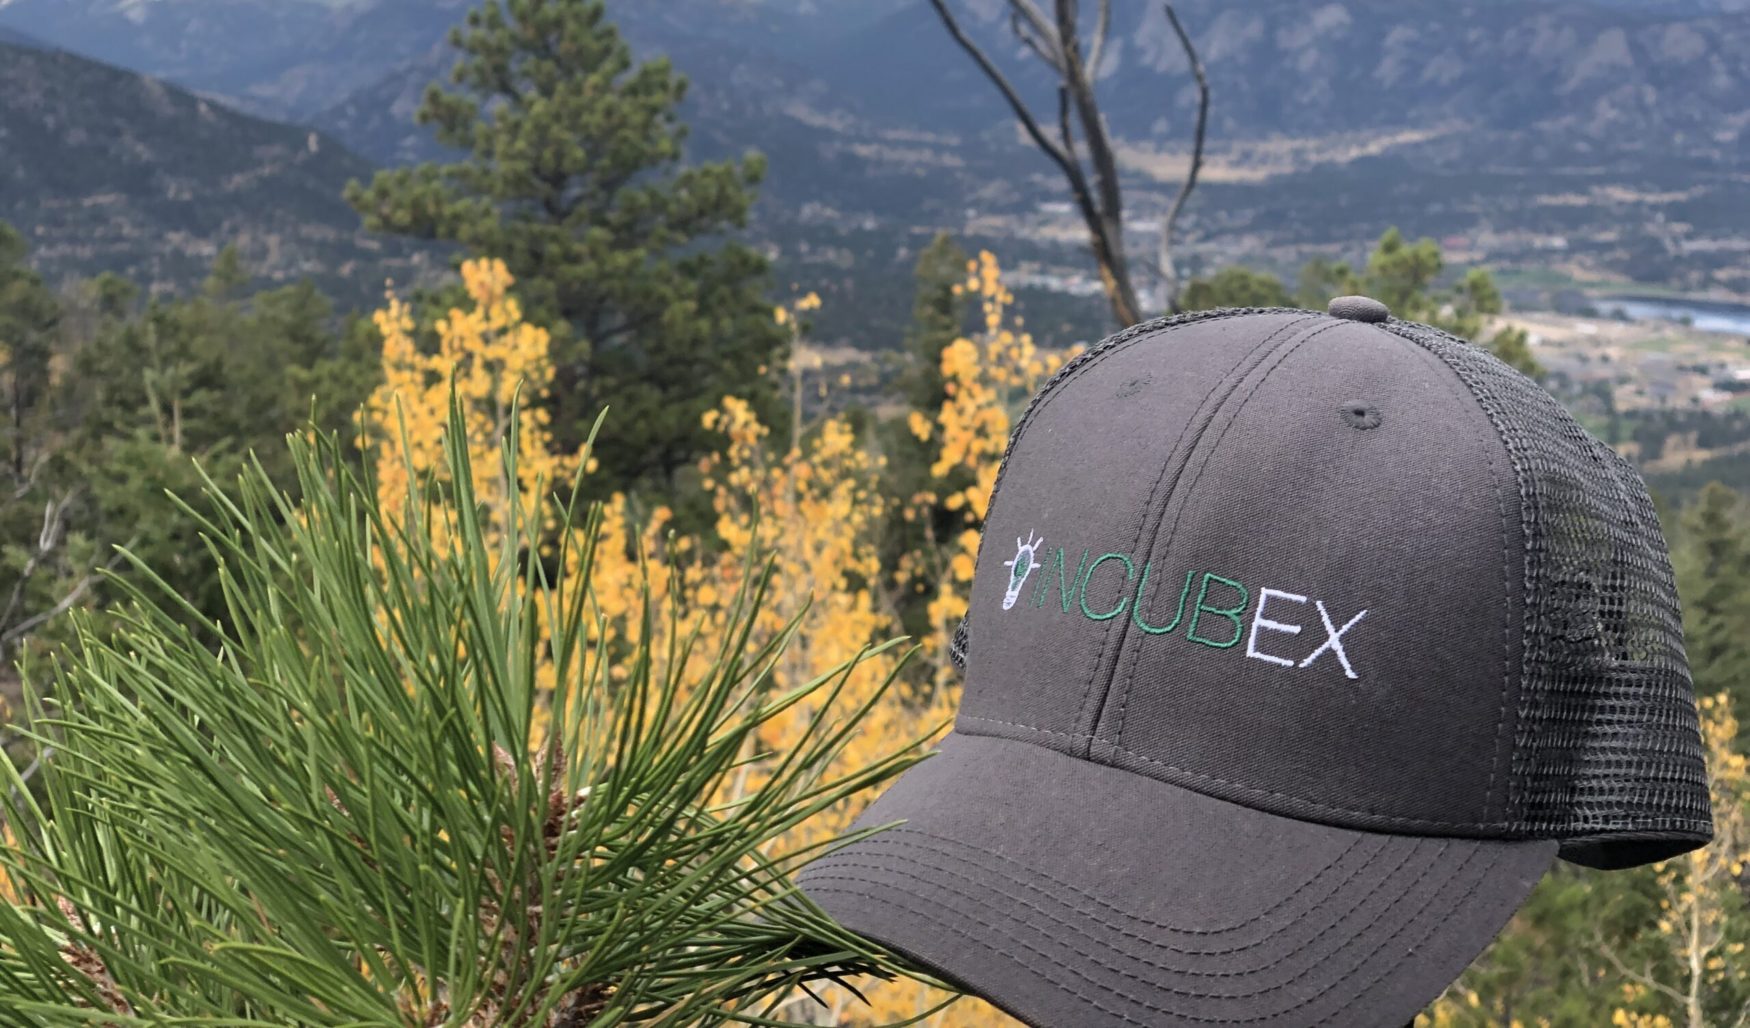 Black IncubEx hat with scenic background